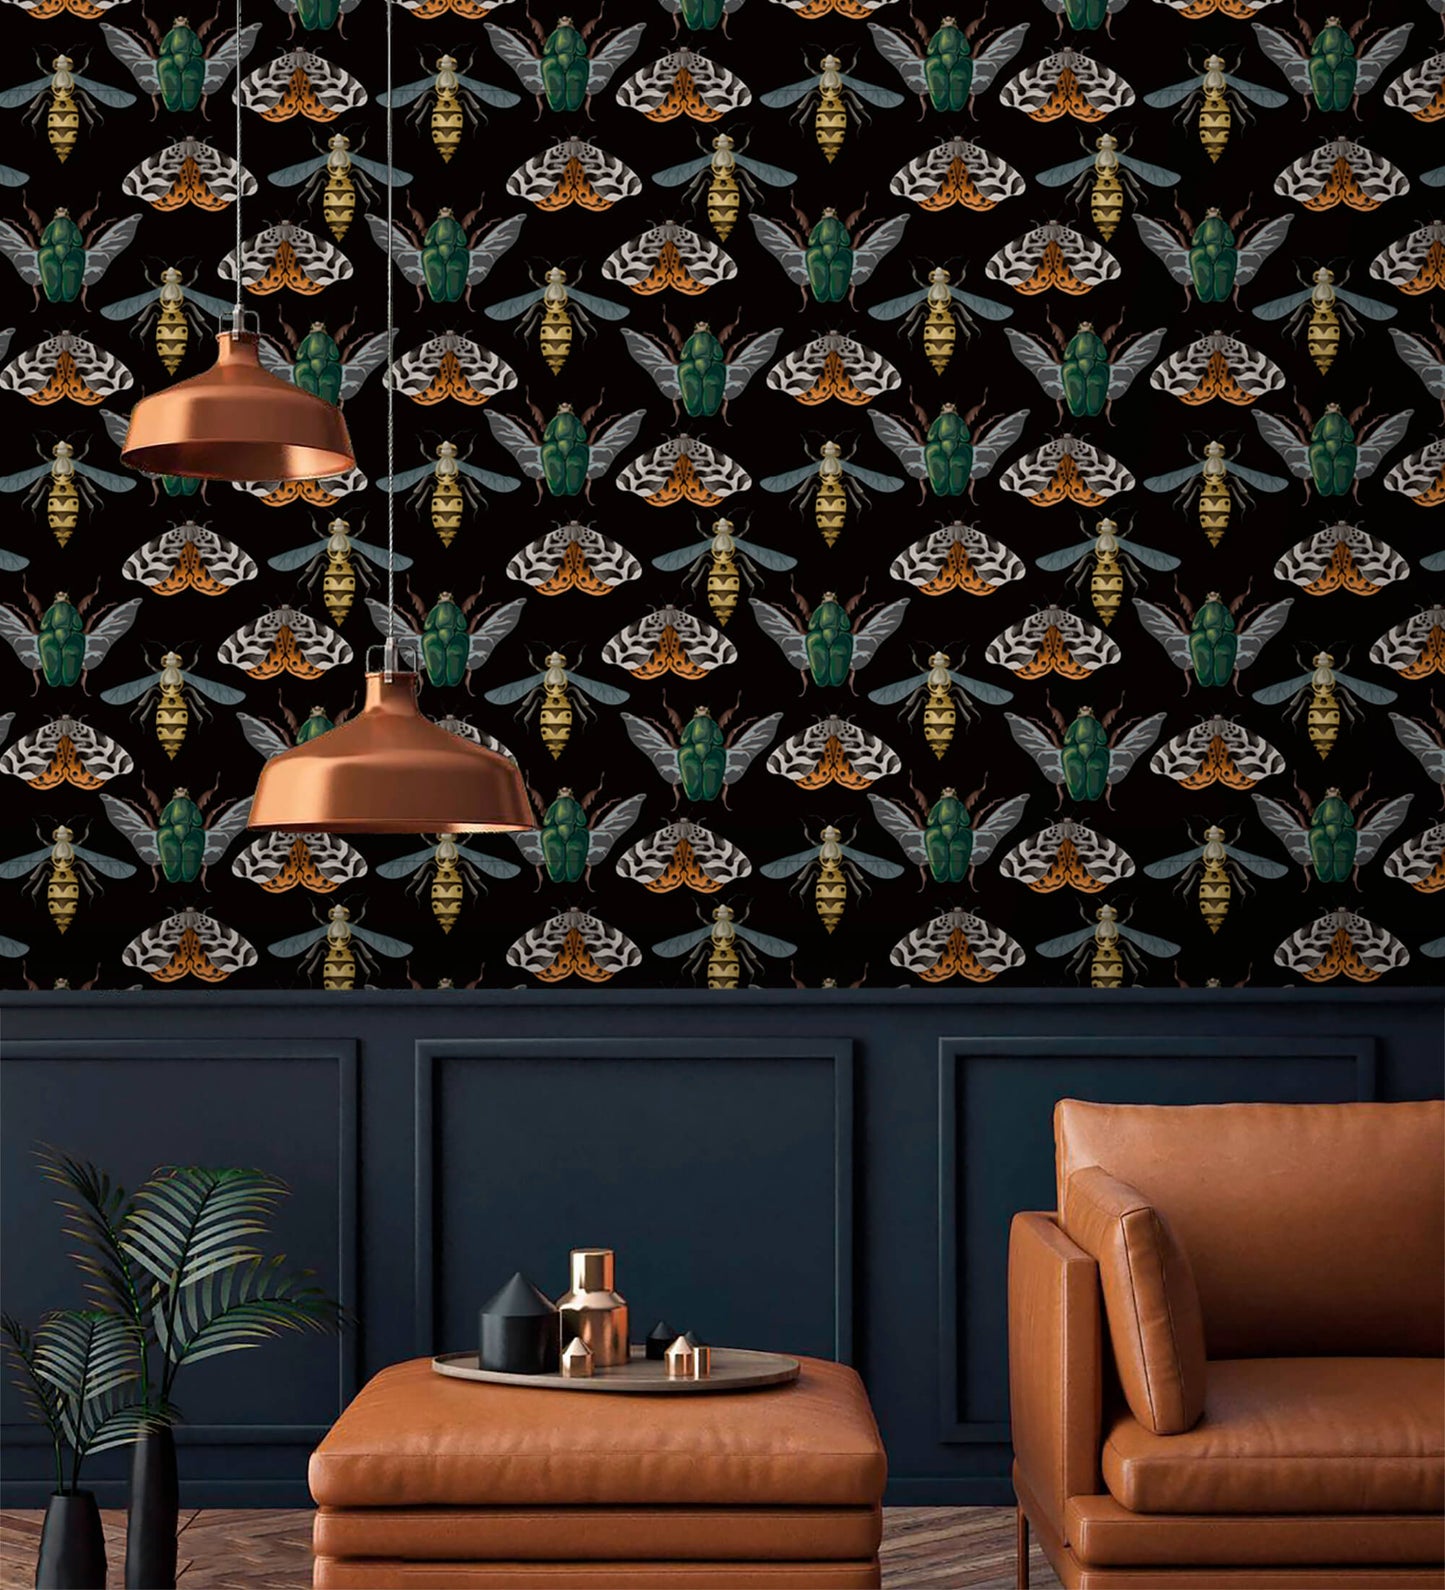 Insect Harmony Wallpaper: Bring the beauty of nature indoors with this whimsical design, featuring a symphony of insects amidst lush foliage, adding a touch of charm and wonder to your space